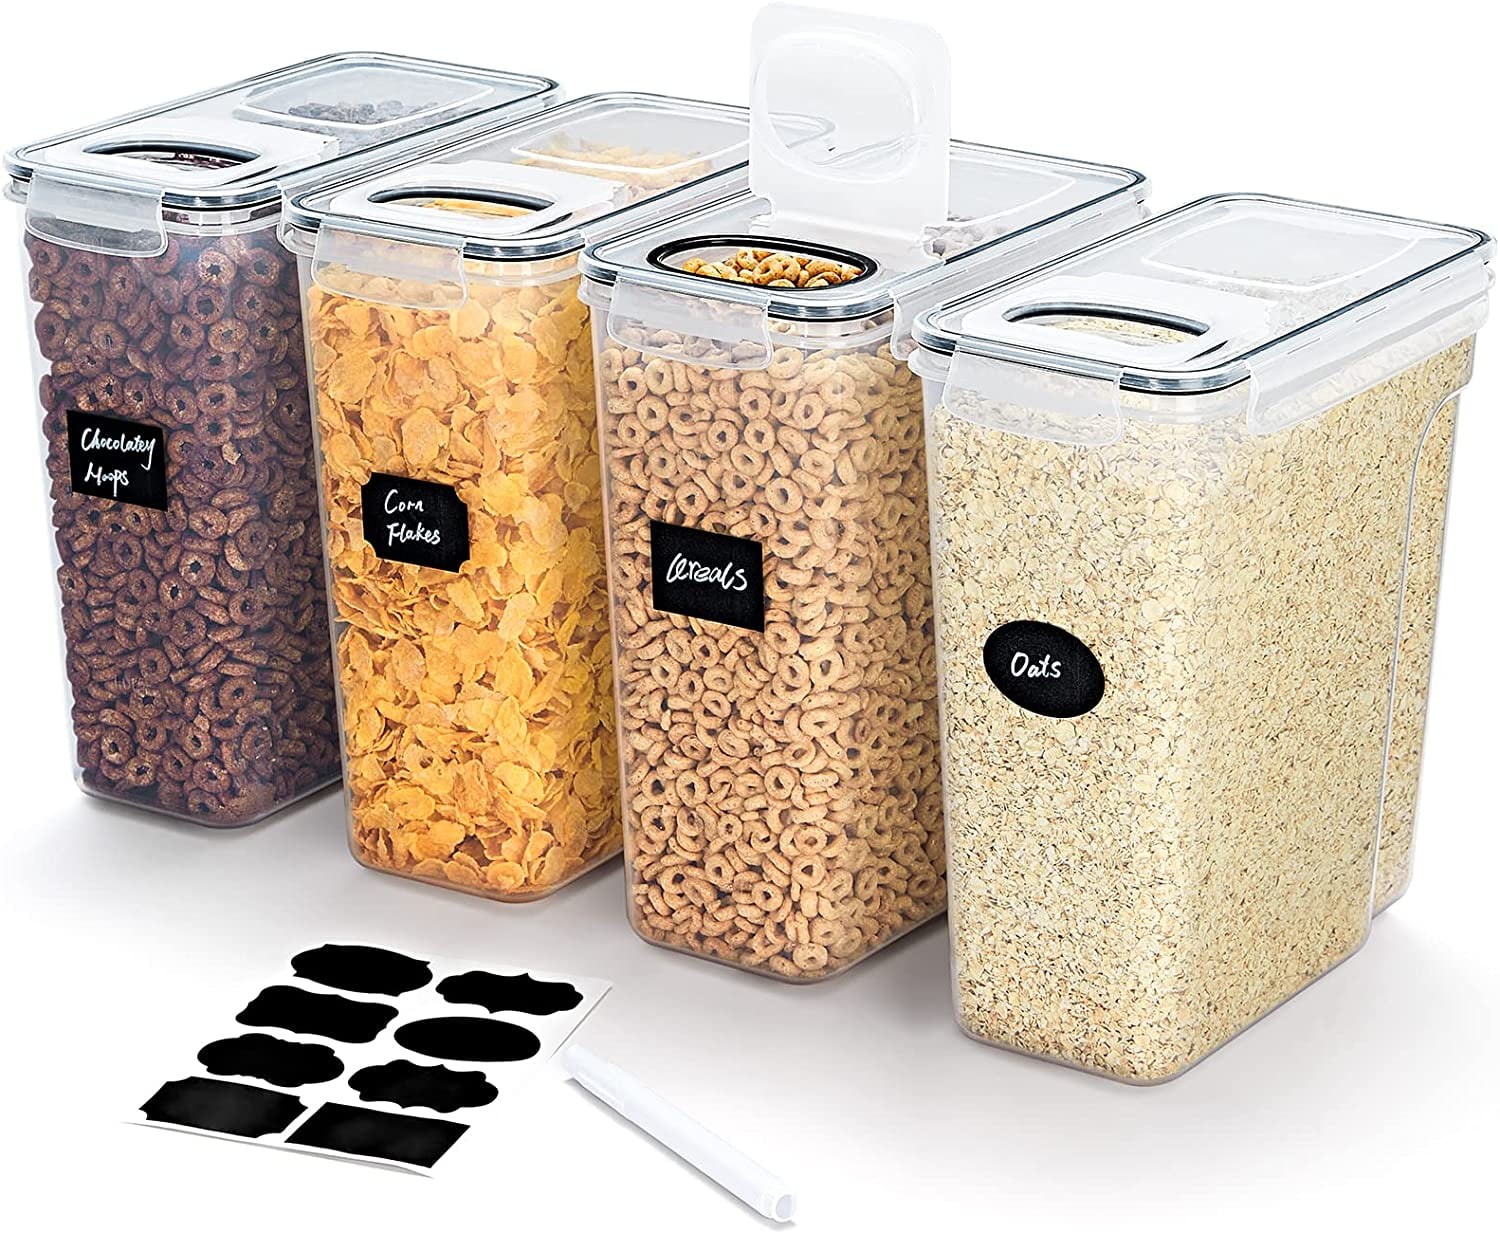 Airtight Glass Food Storage Containers from Life Without Plastic